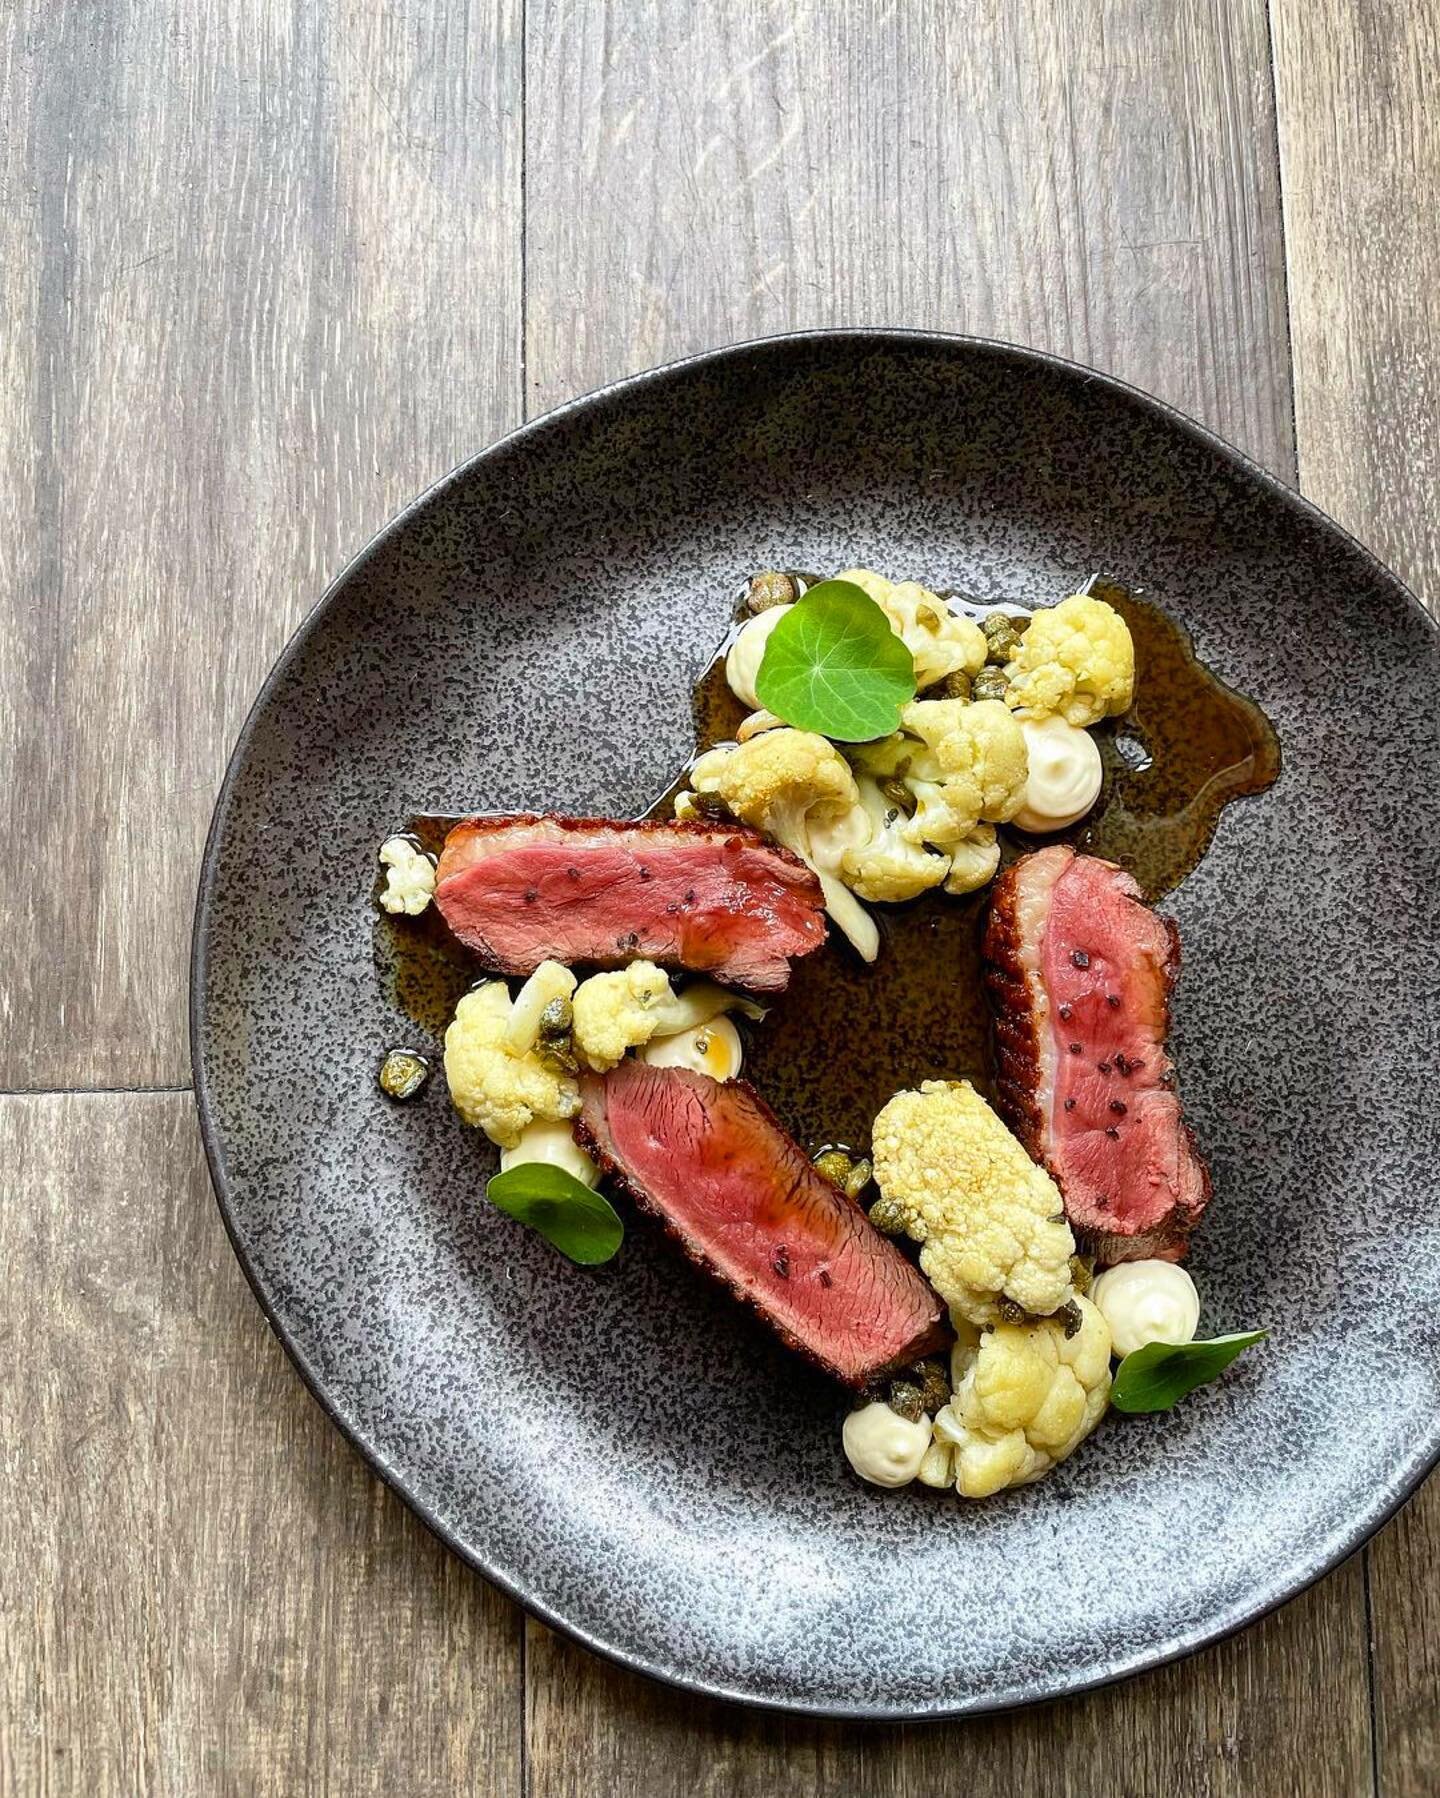 Beauty in the details. Hamlet &amp; Ghost does it best. 🍴

#Repost @lempka_gram
・・・
-Duck-

A new Duck set with no frills. La Belle Farm Duck Breast, some roasted cauliflower that&rsquo;s quickly saut&eacute;ed with capers in brown butter, a lemon a